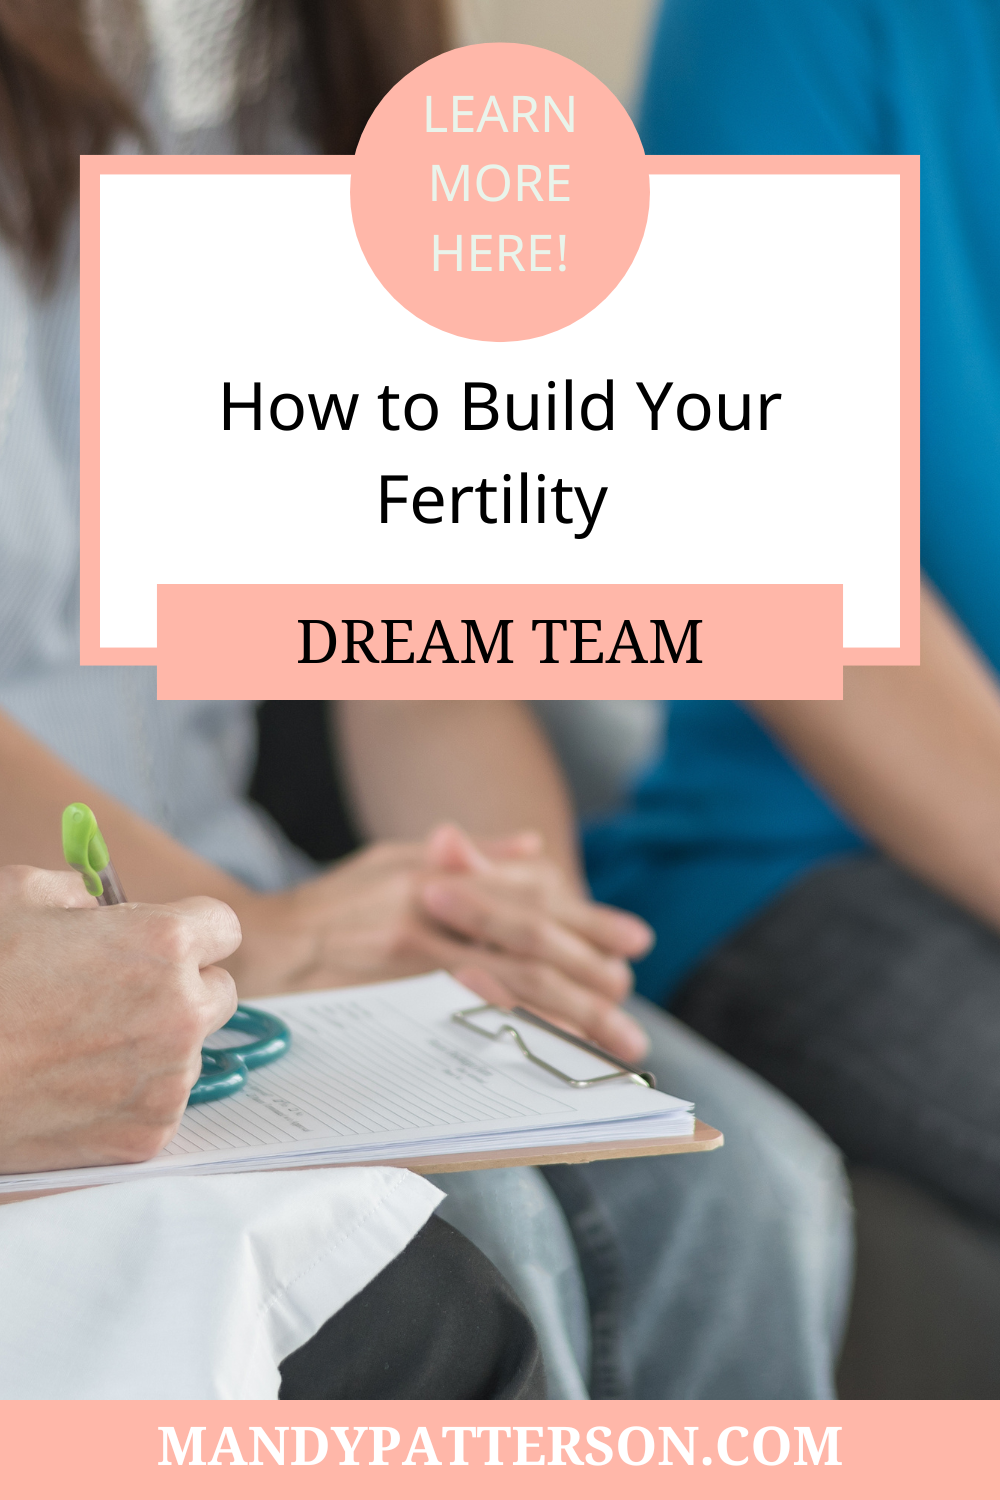 How to Build Your Fertility Dream Team